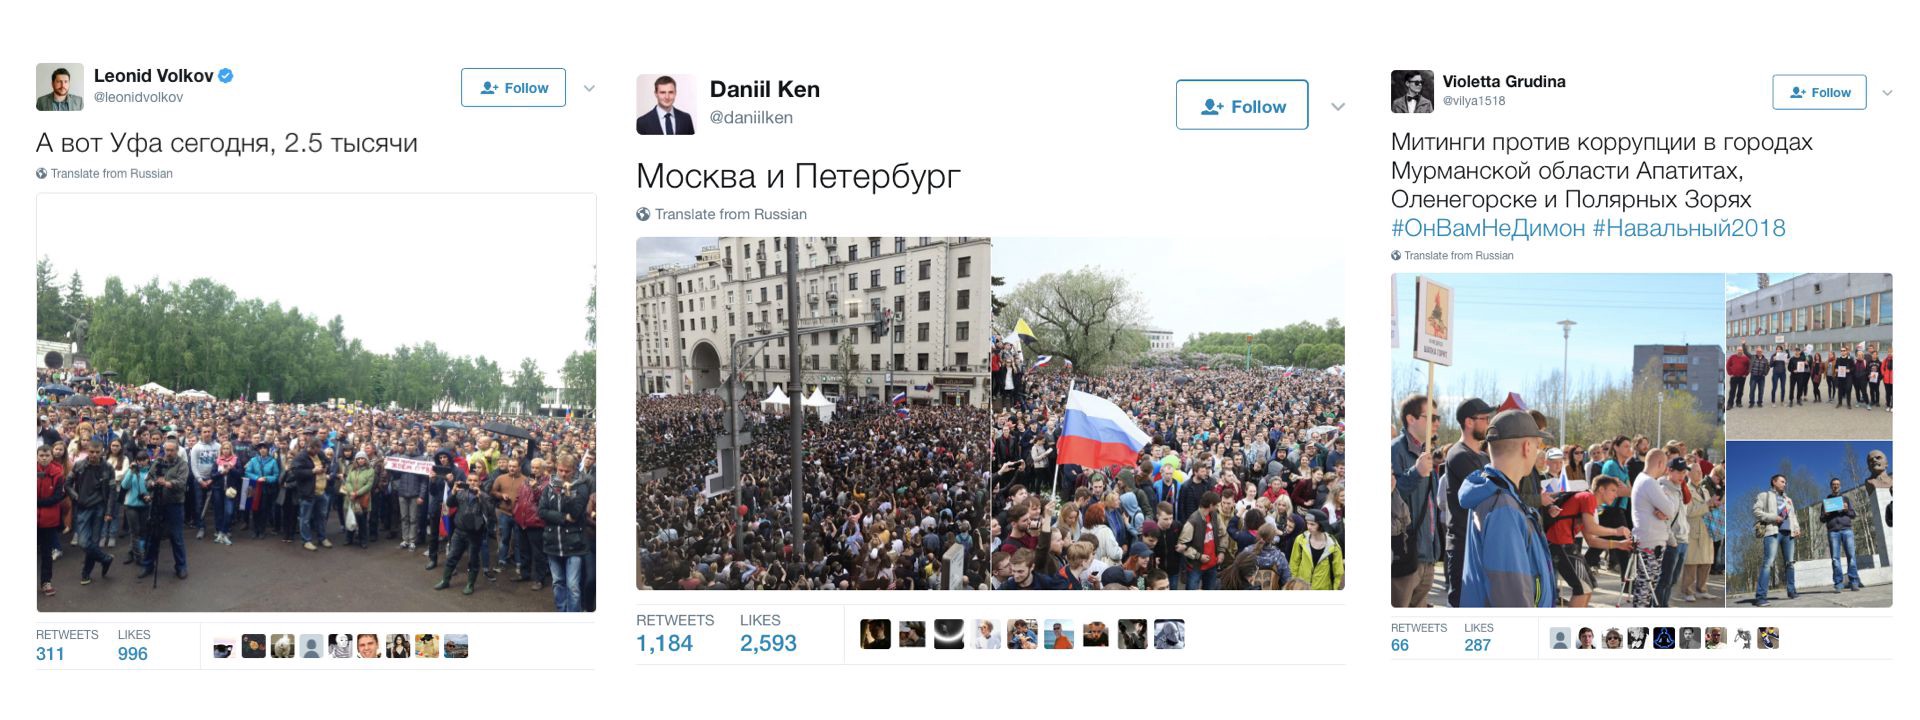 #RussiaProtests: Round Two